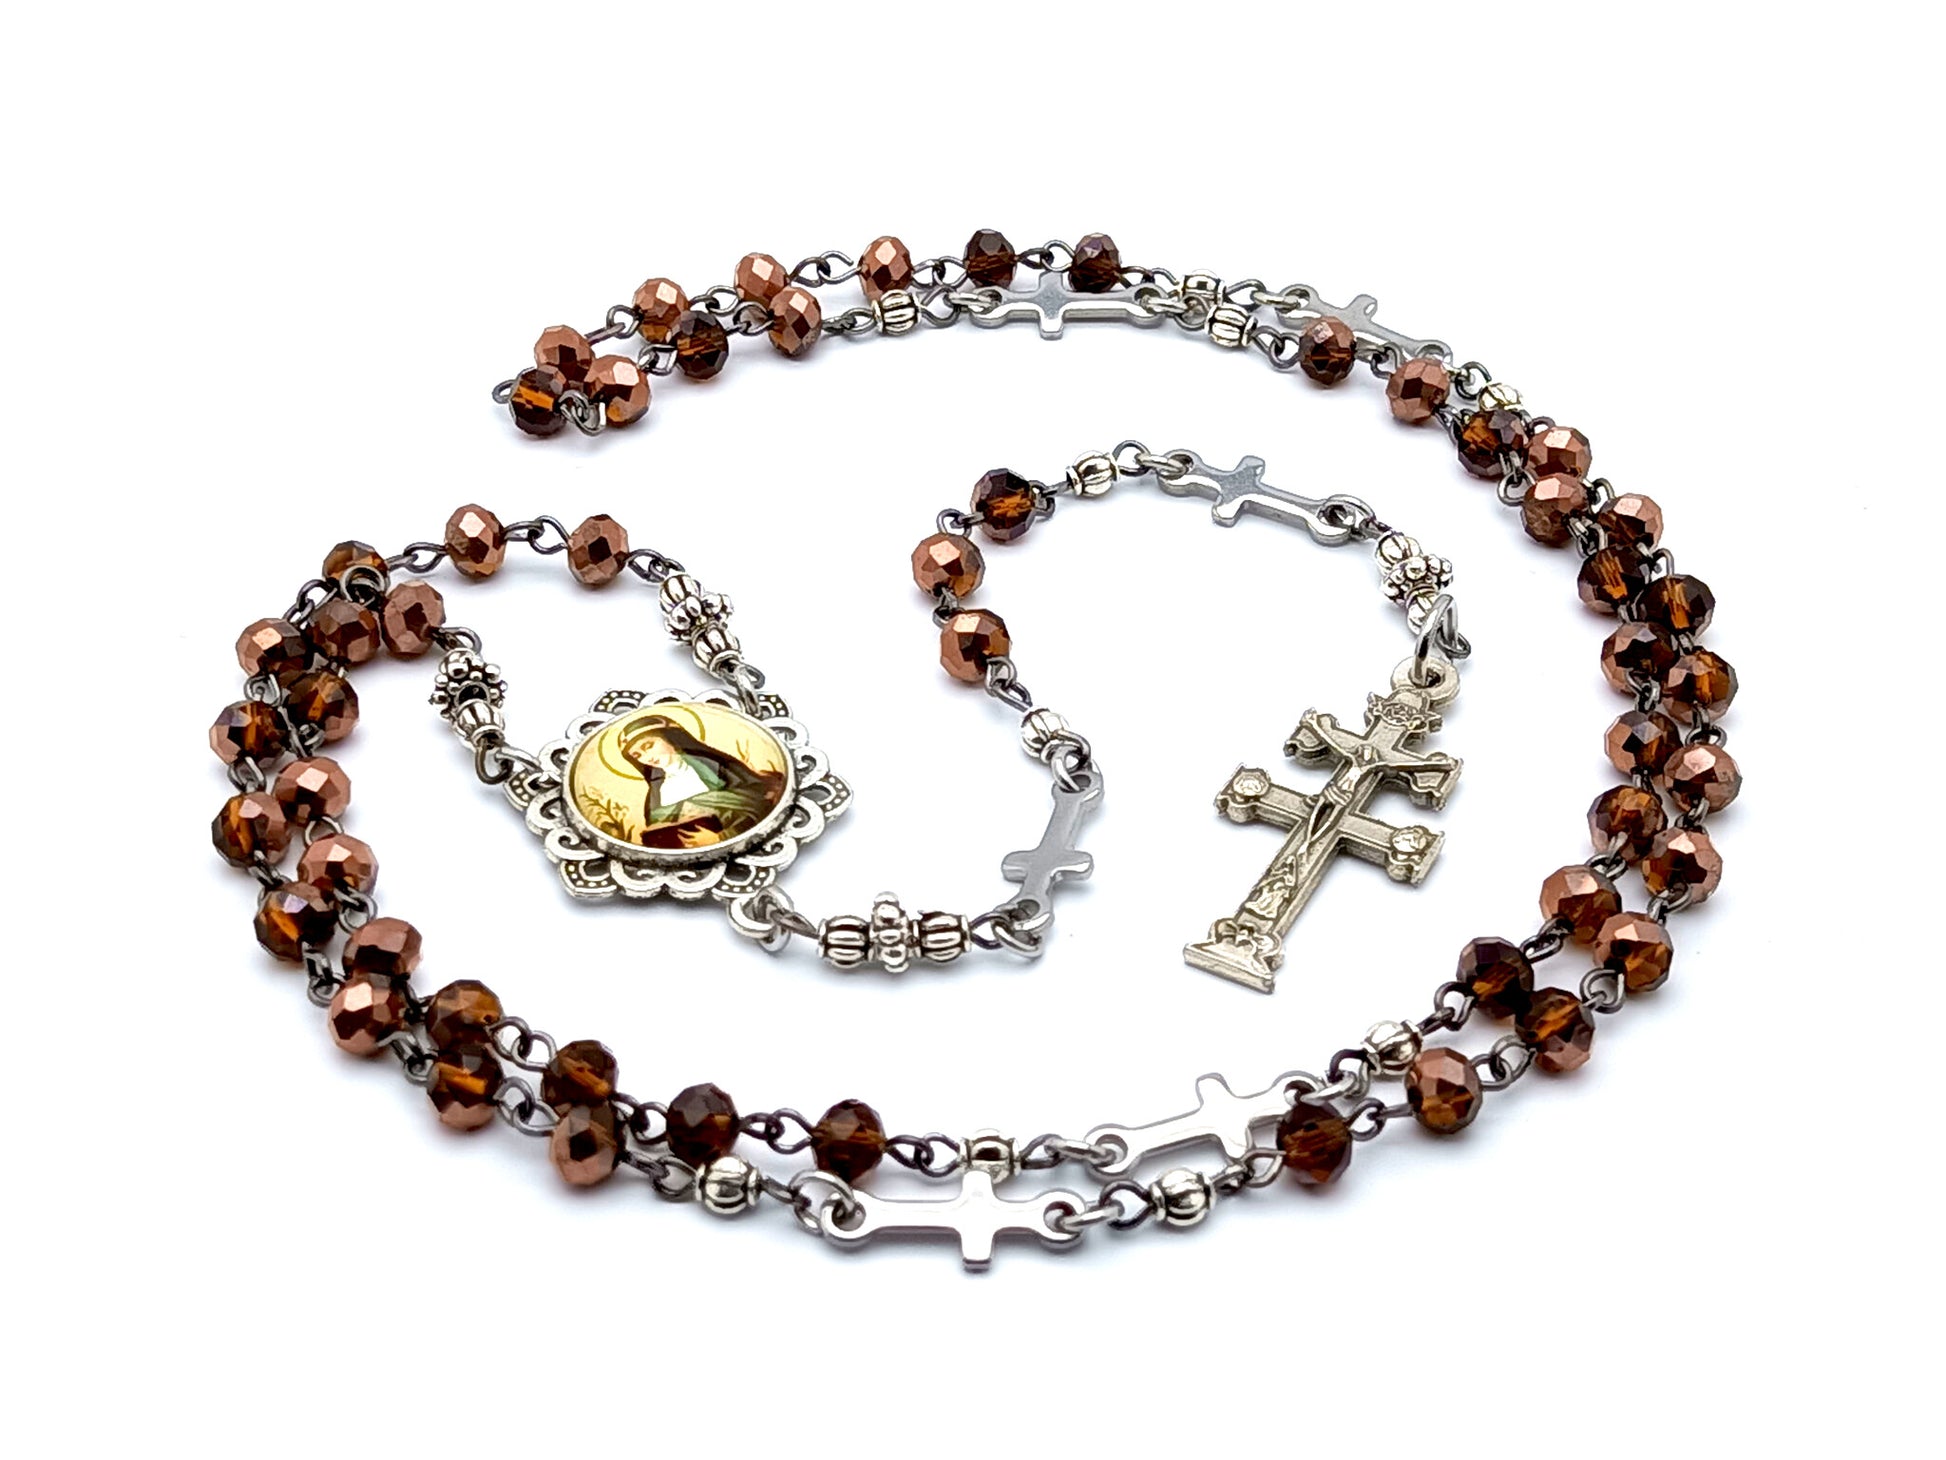 Saint Teresa of Avila unique rosary beads with glass and stainless steel linking cross beads and Caravaca crucifix.